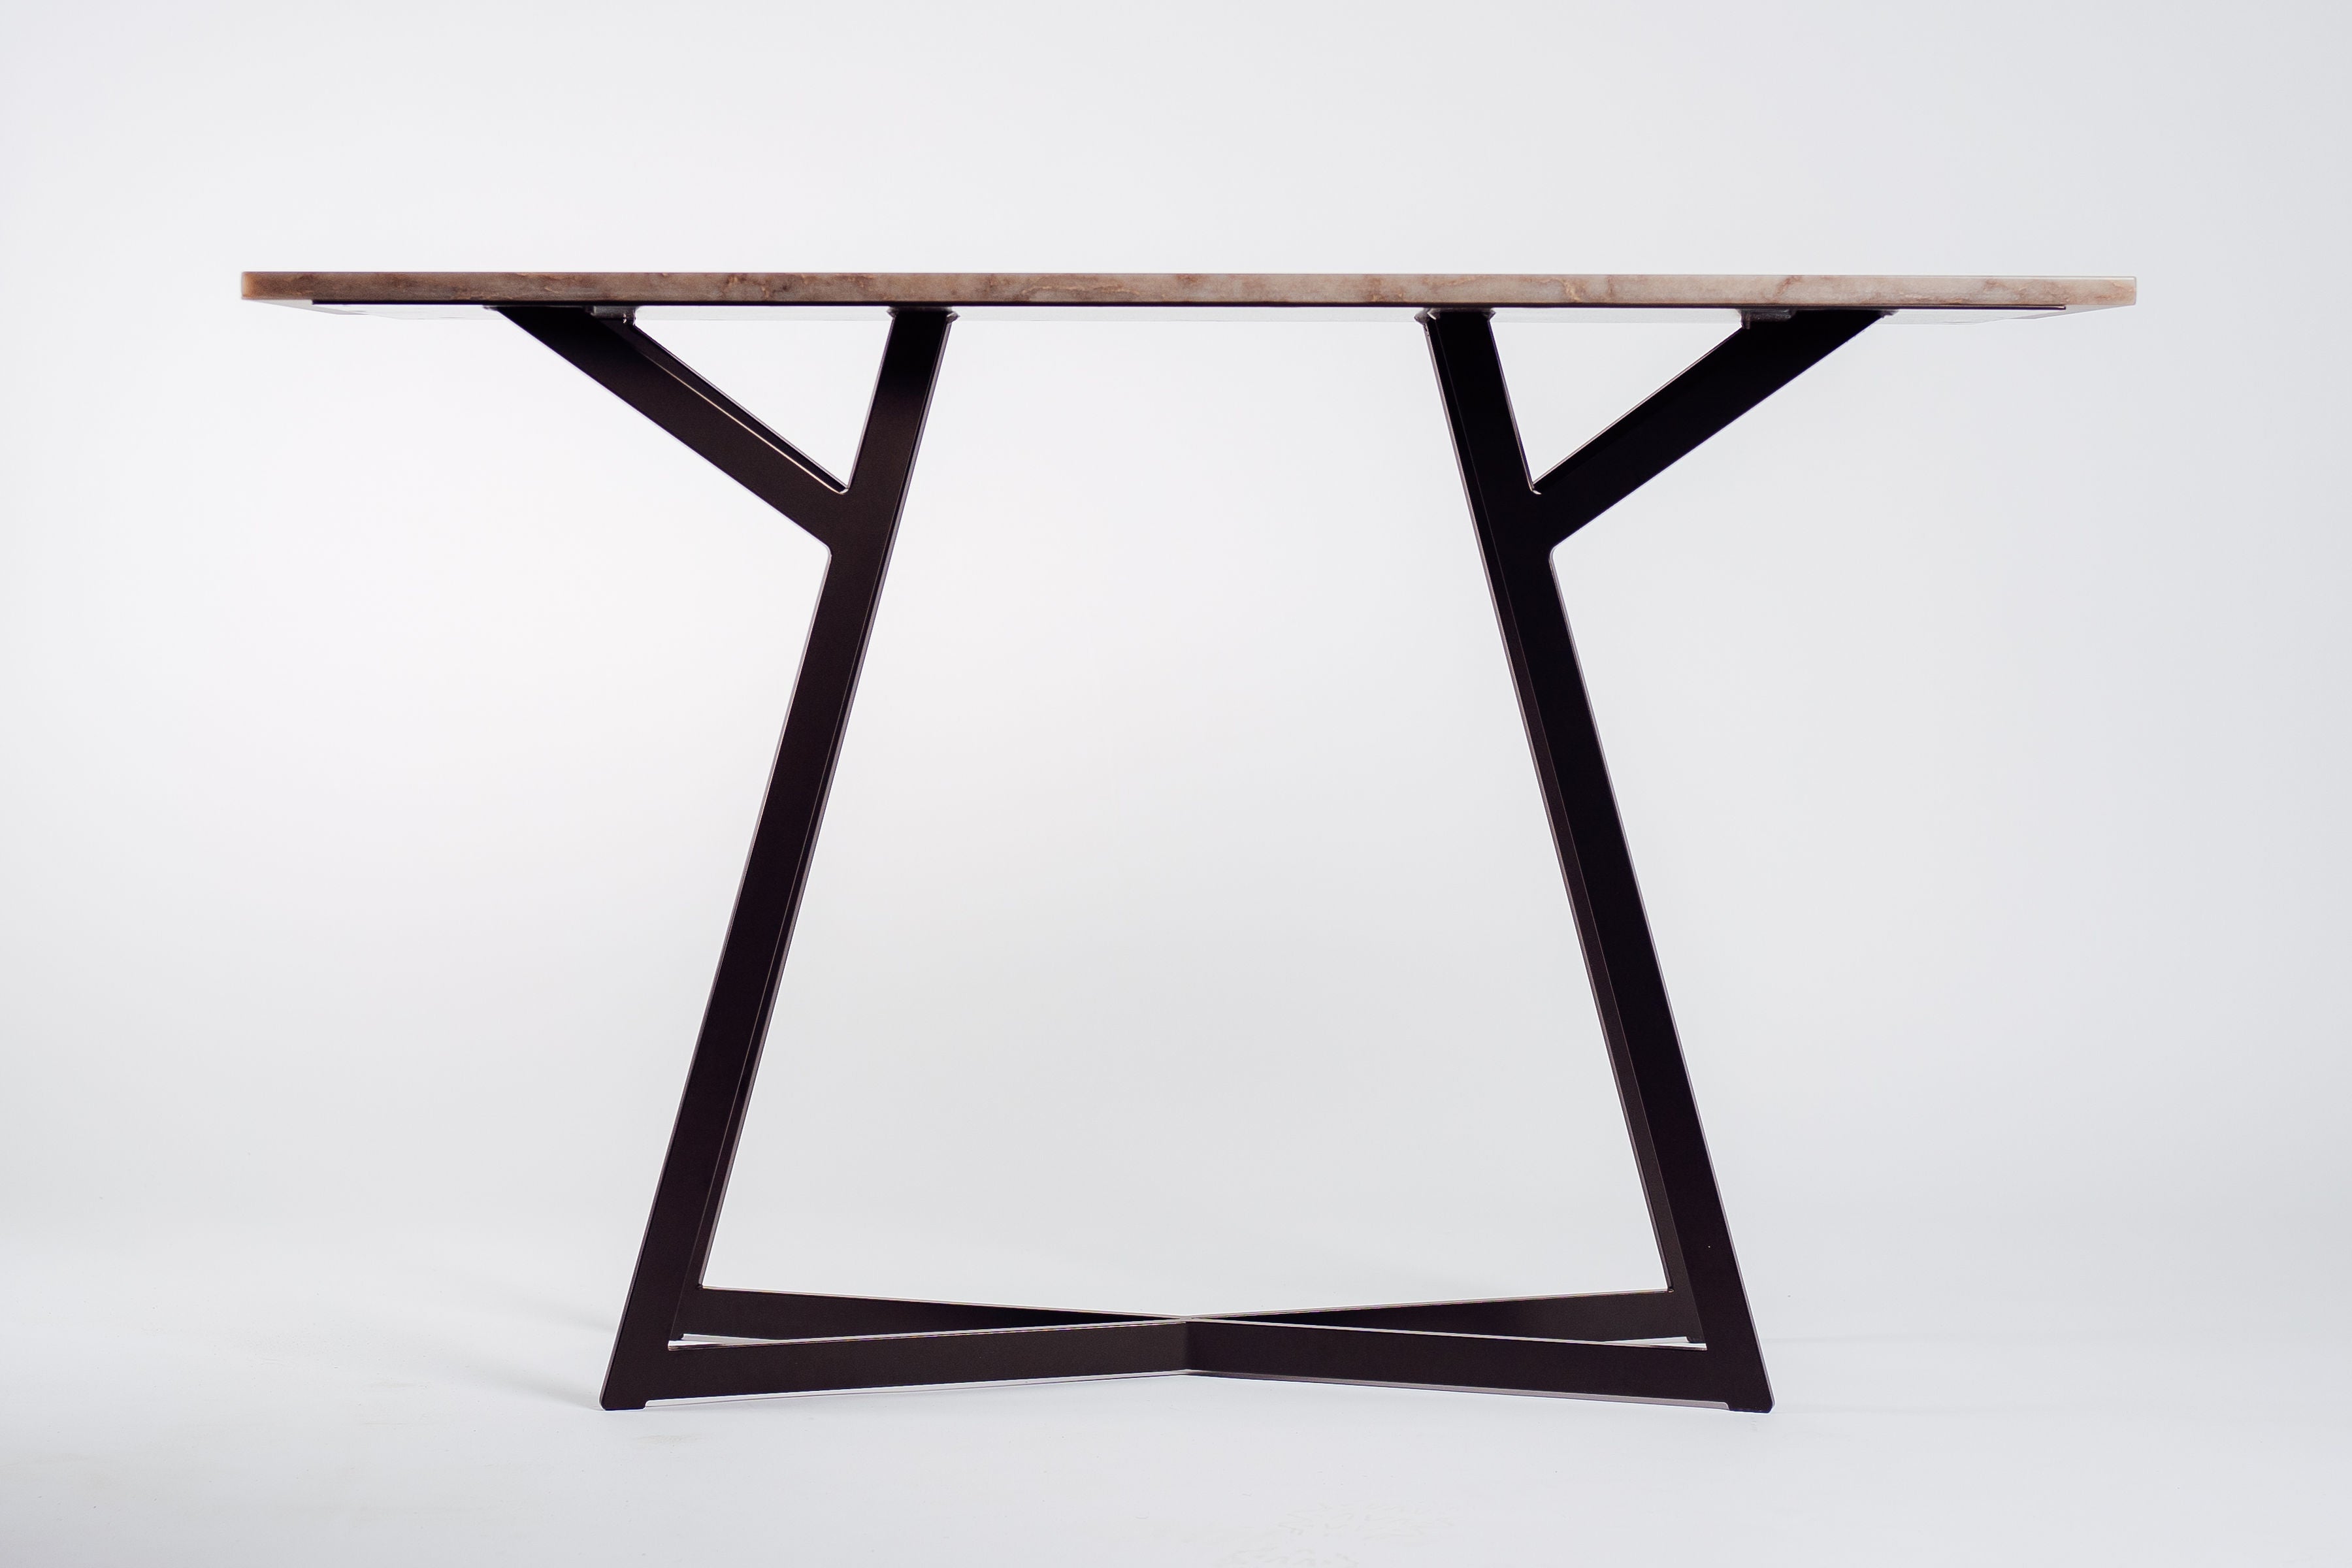 Paula midcentury modern quartz console Table handcrafted by Hunt & Noyer in Michigan